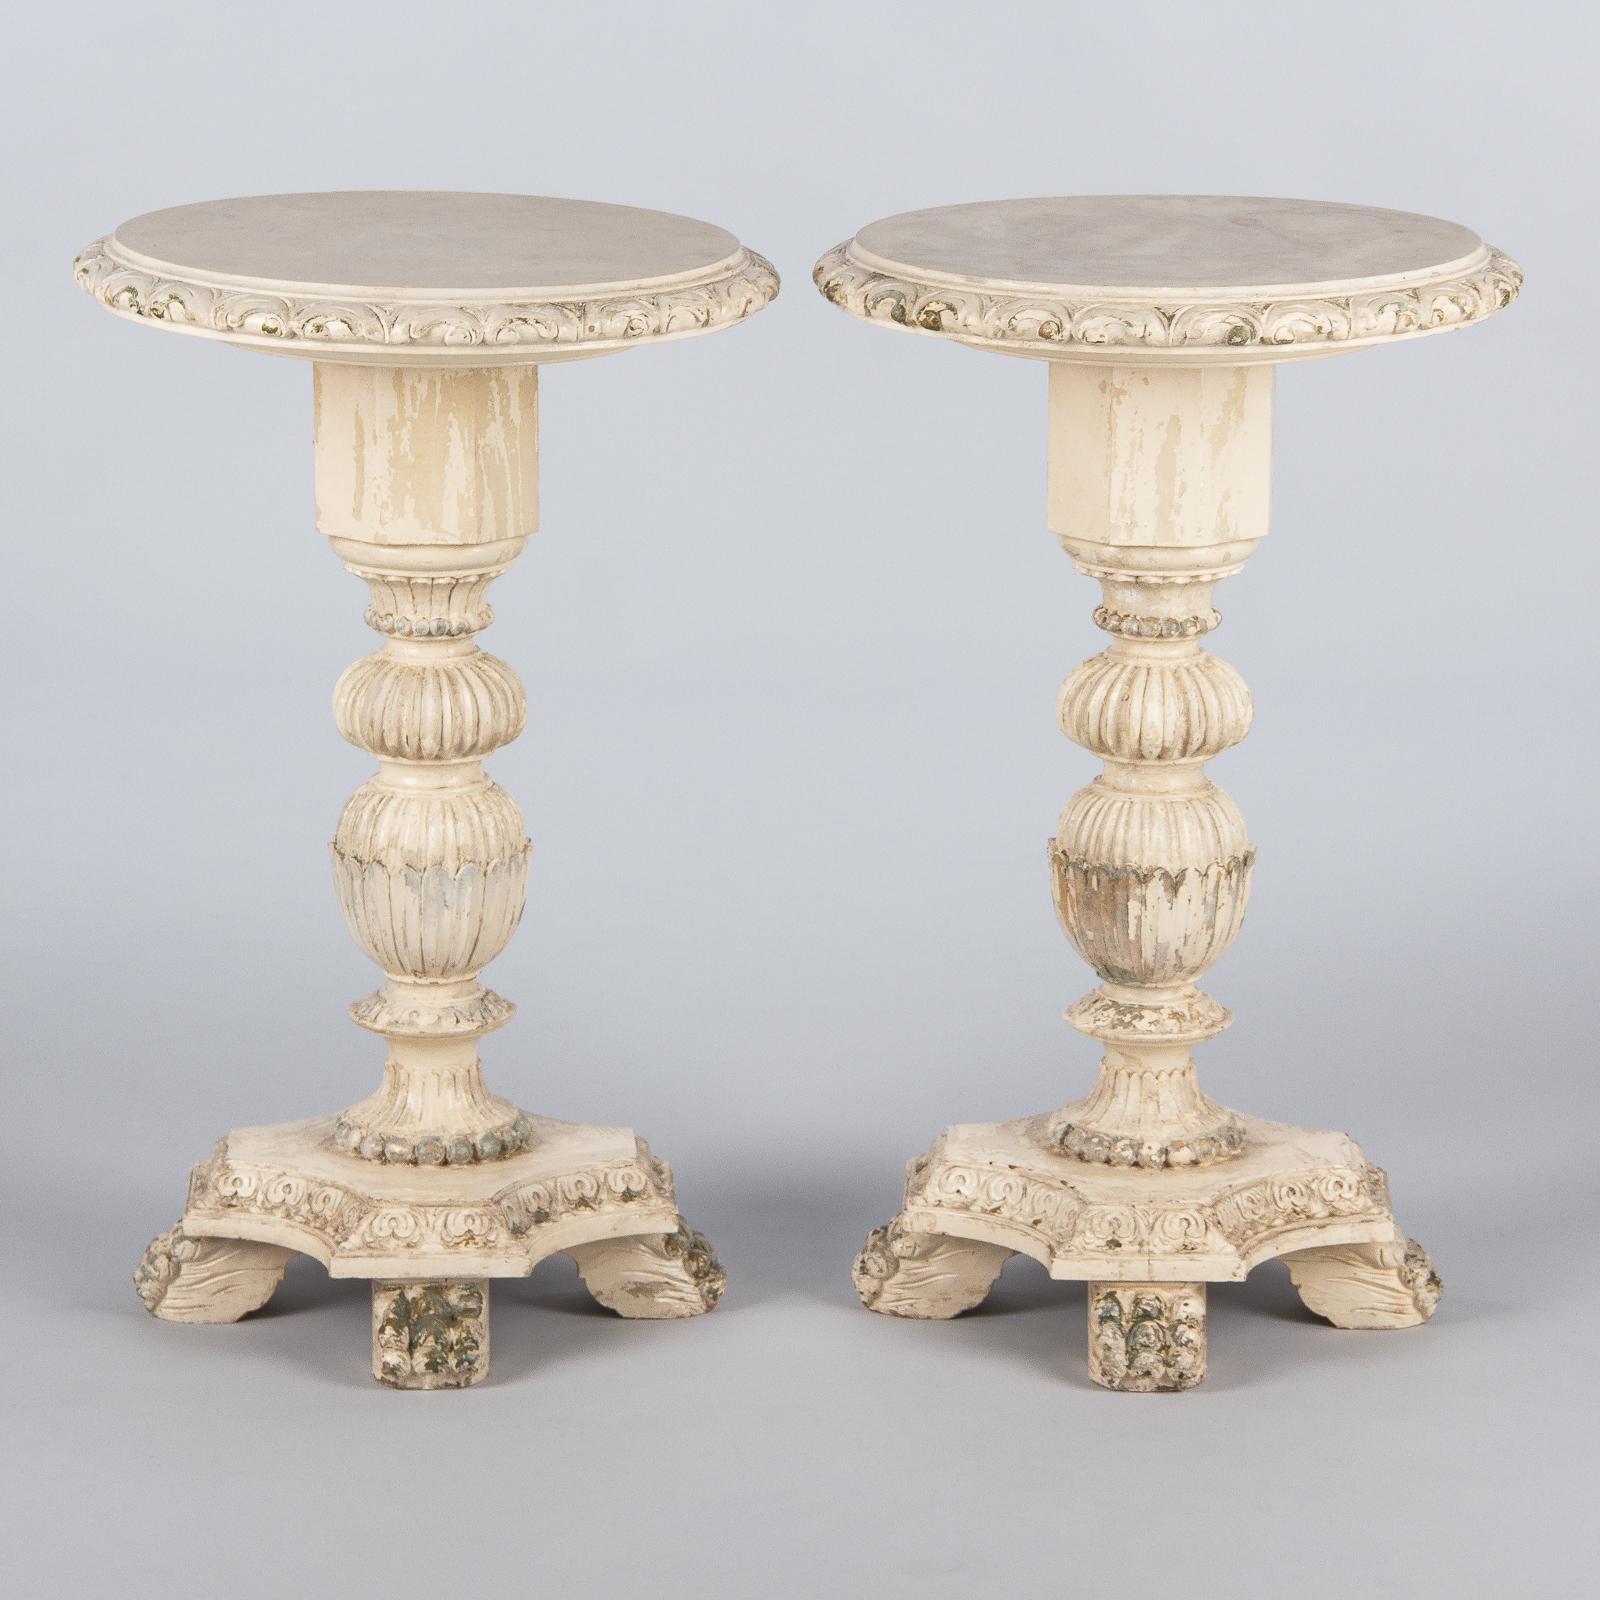 20th Century Pair of Italian Renaissance Revival Painted Side Tables, 1950s